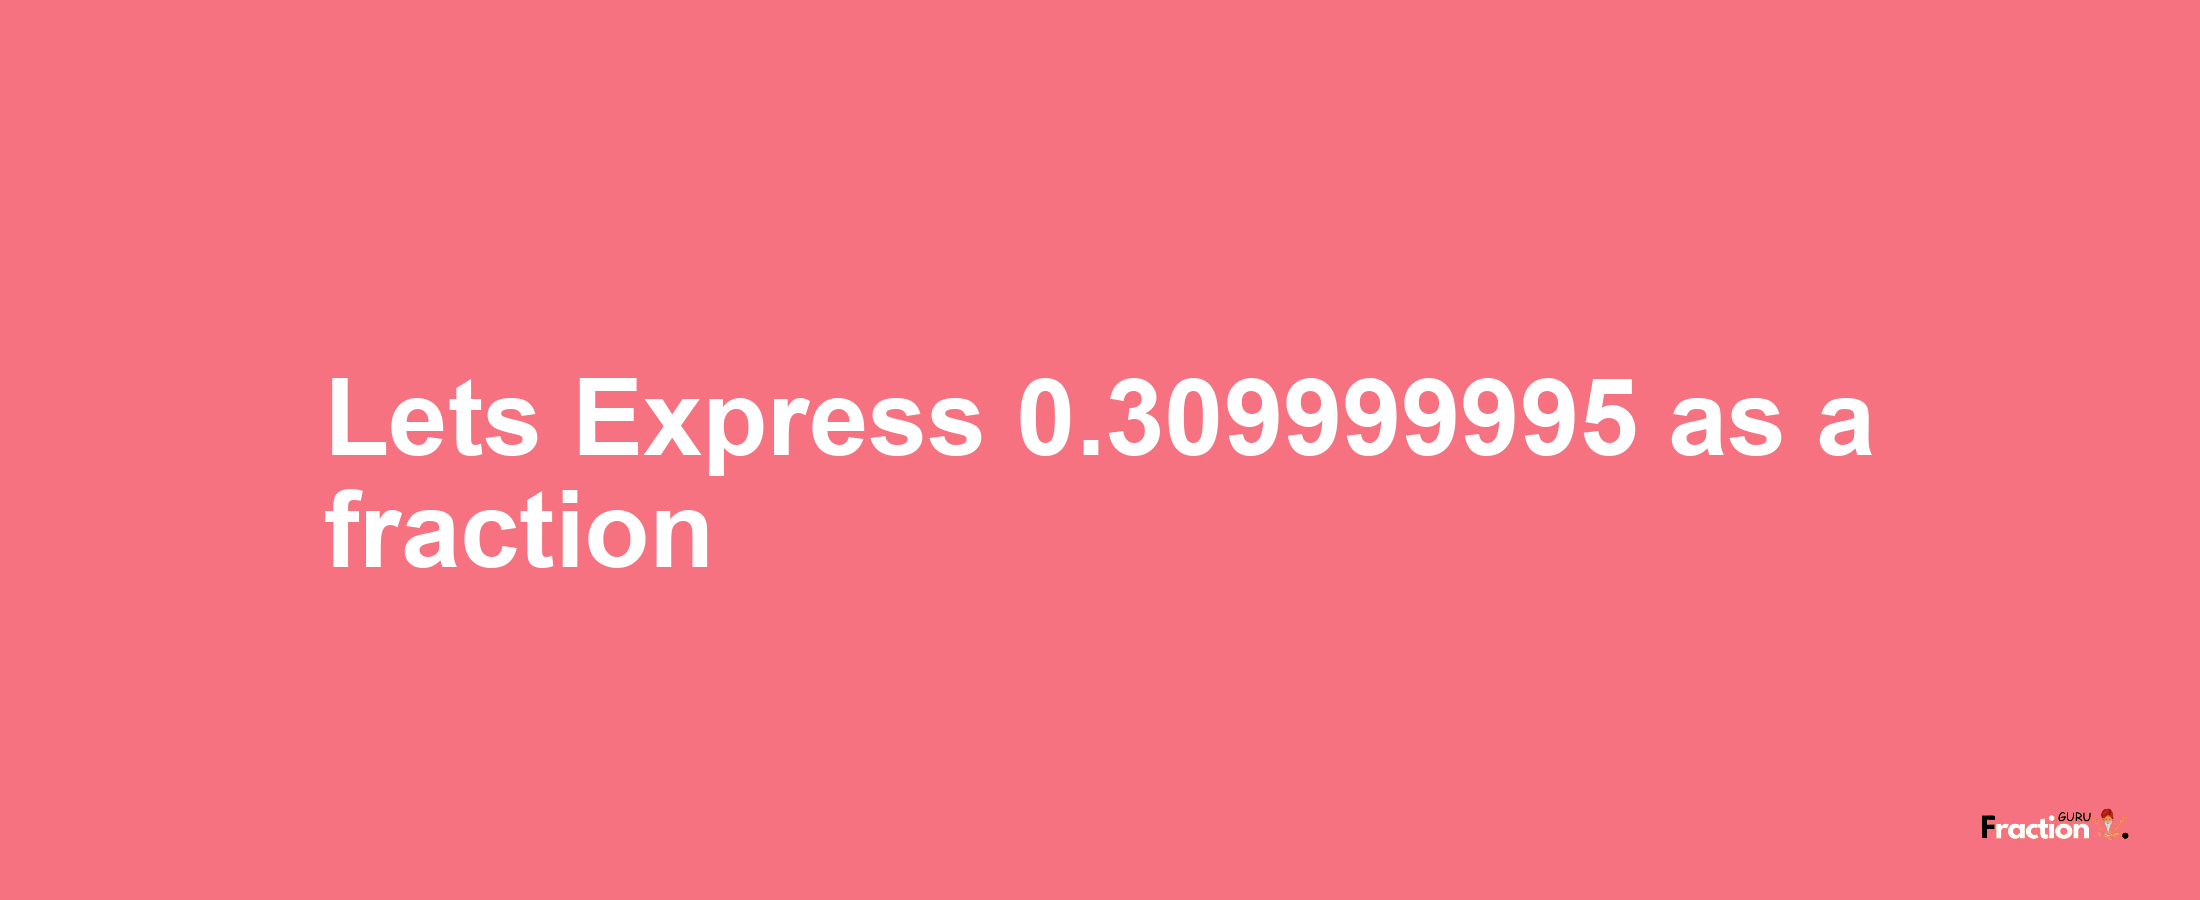 Lets Express 0.309999995 as afraction